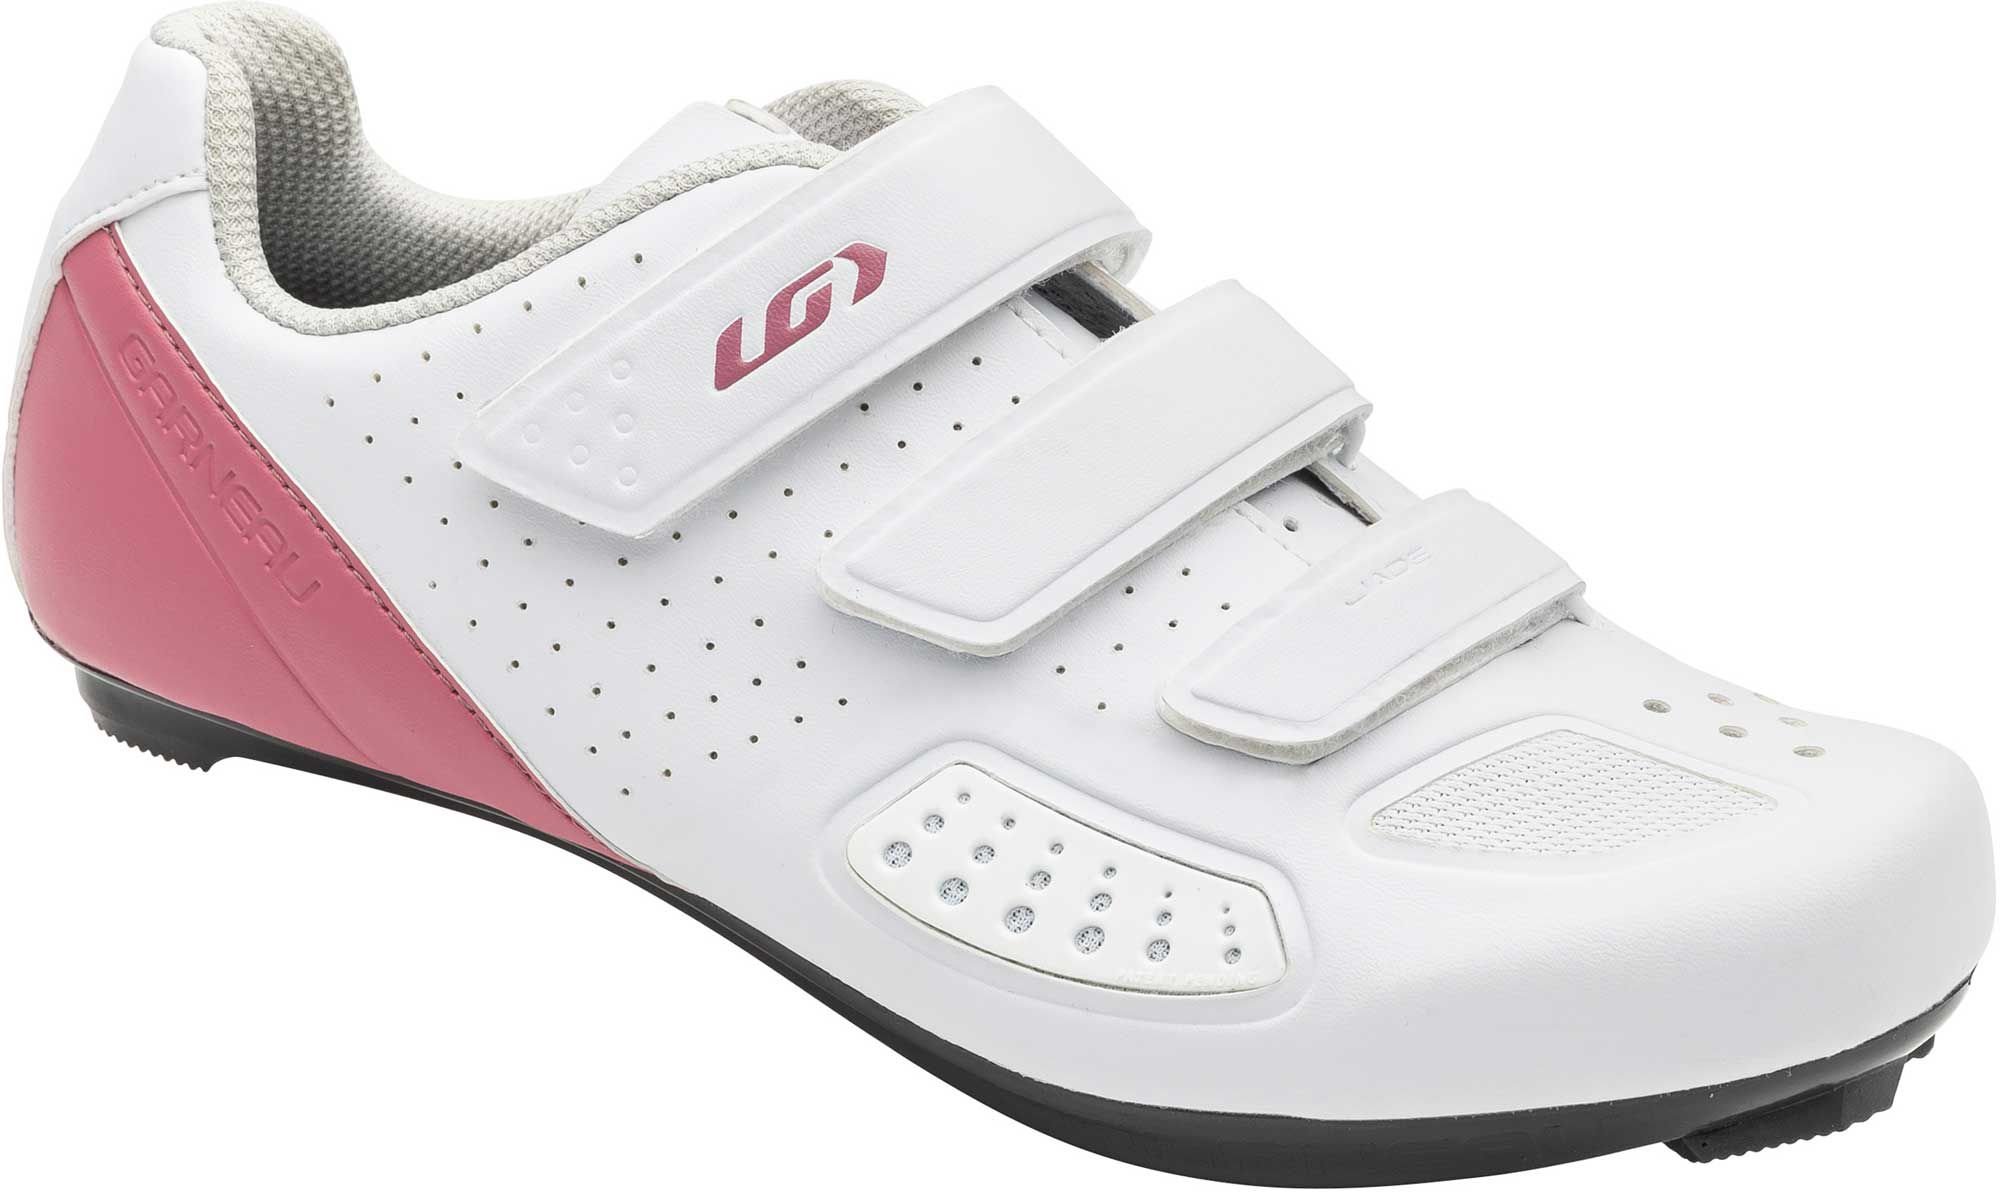 women's cycling shoes without cleats